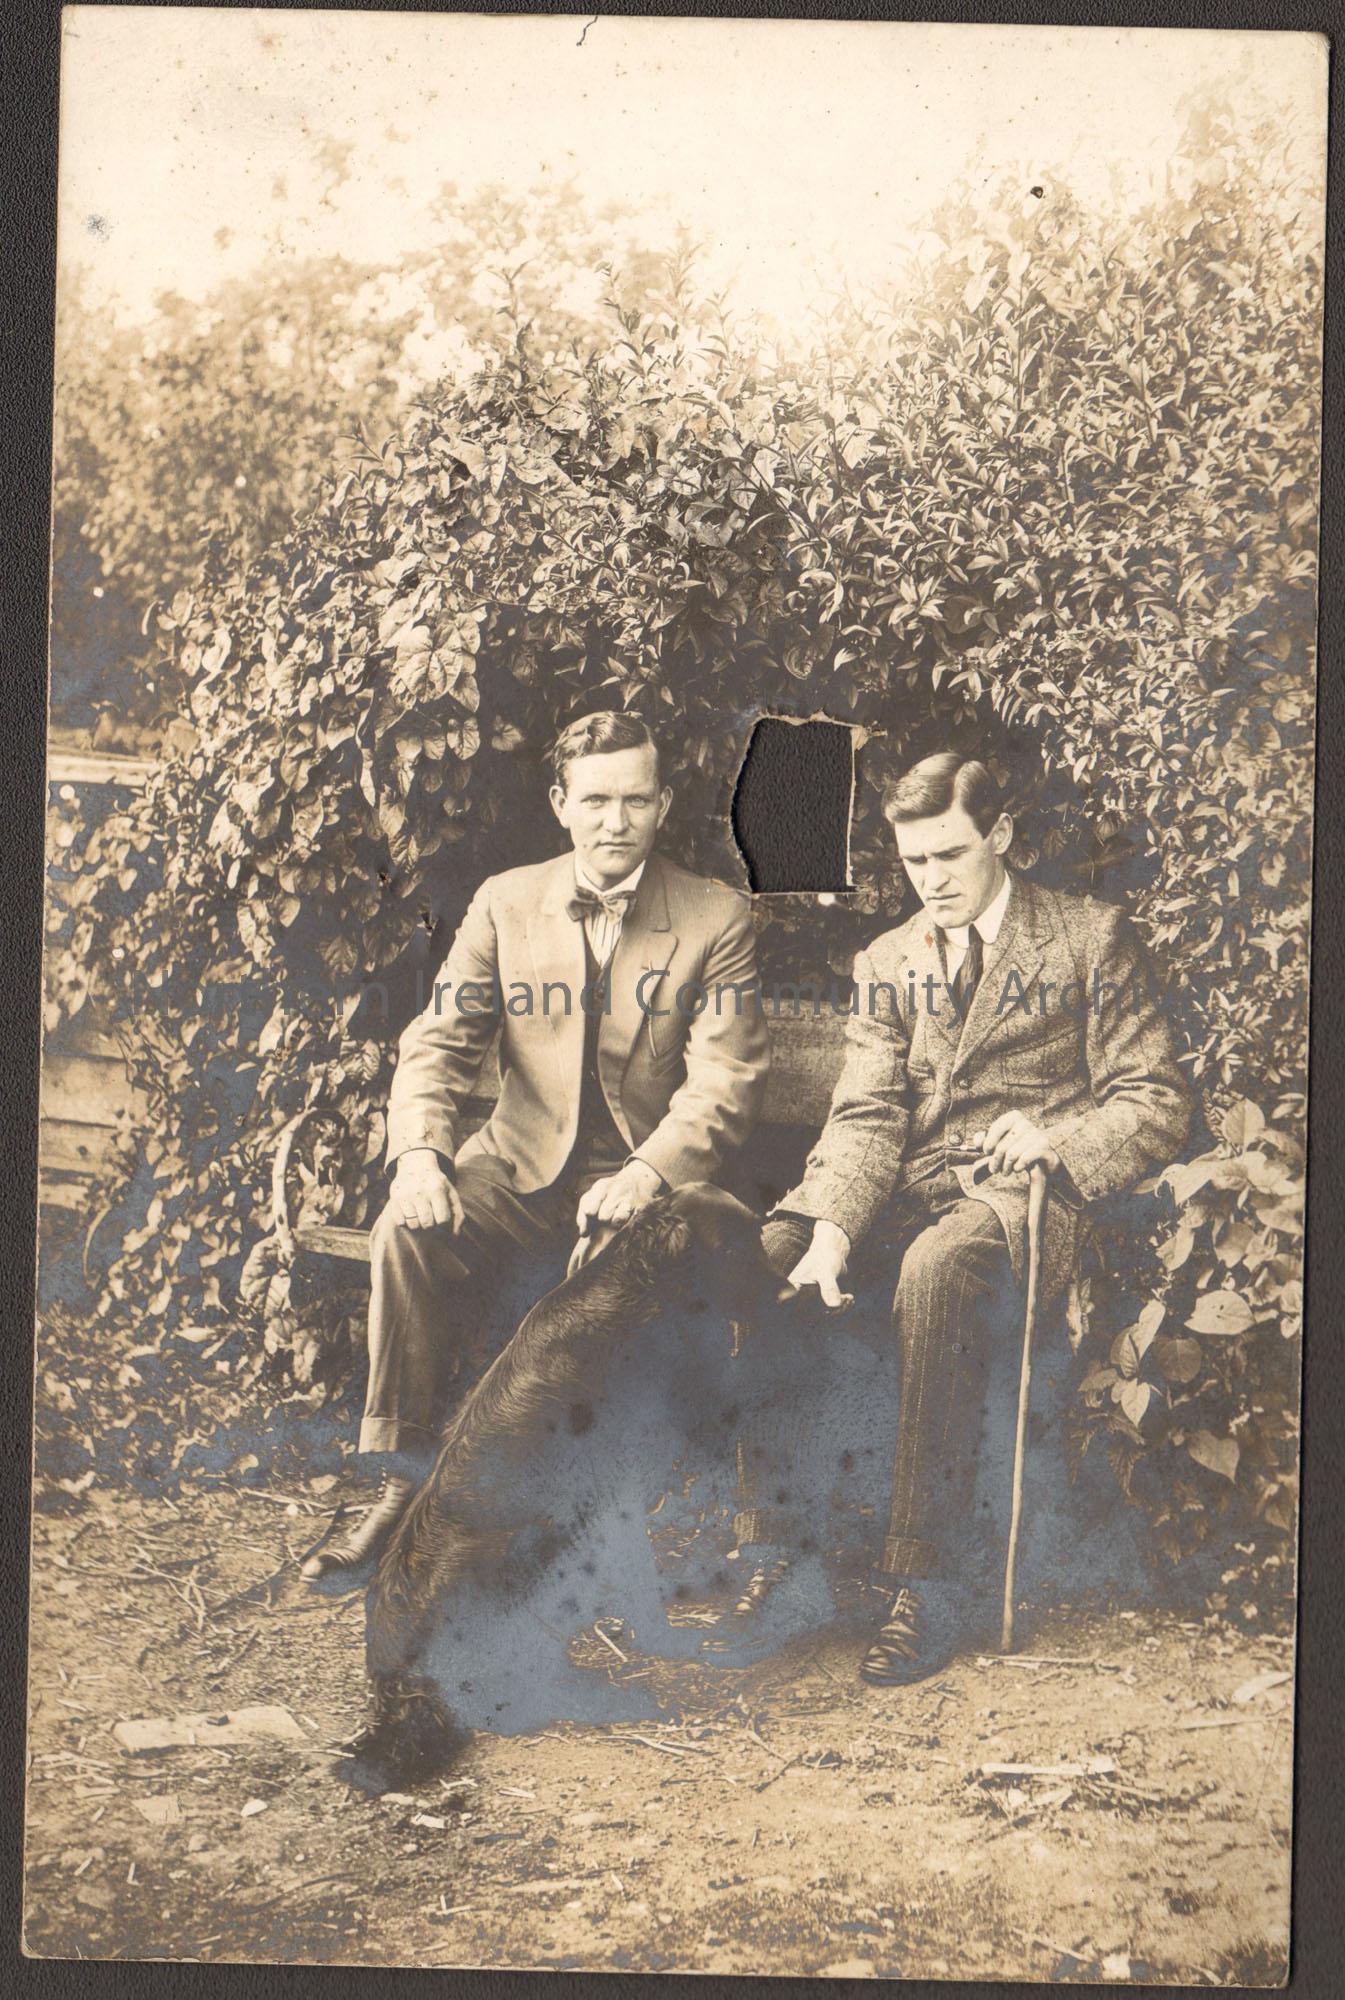 Black and white school photograph of two men sitting in a garden with a dog. On right, George Shiels.